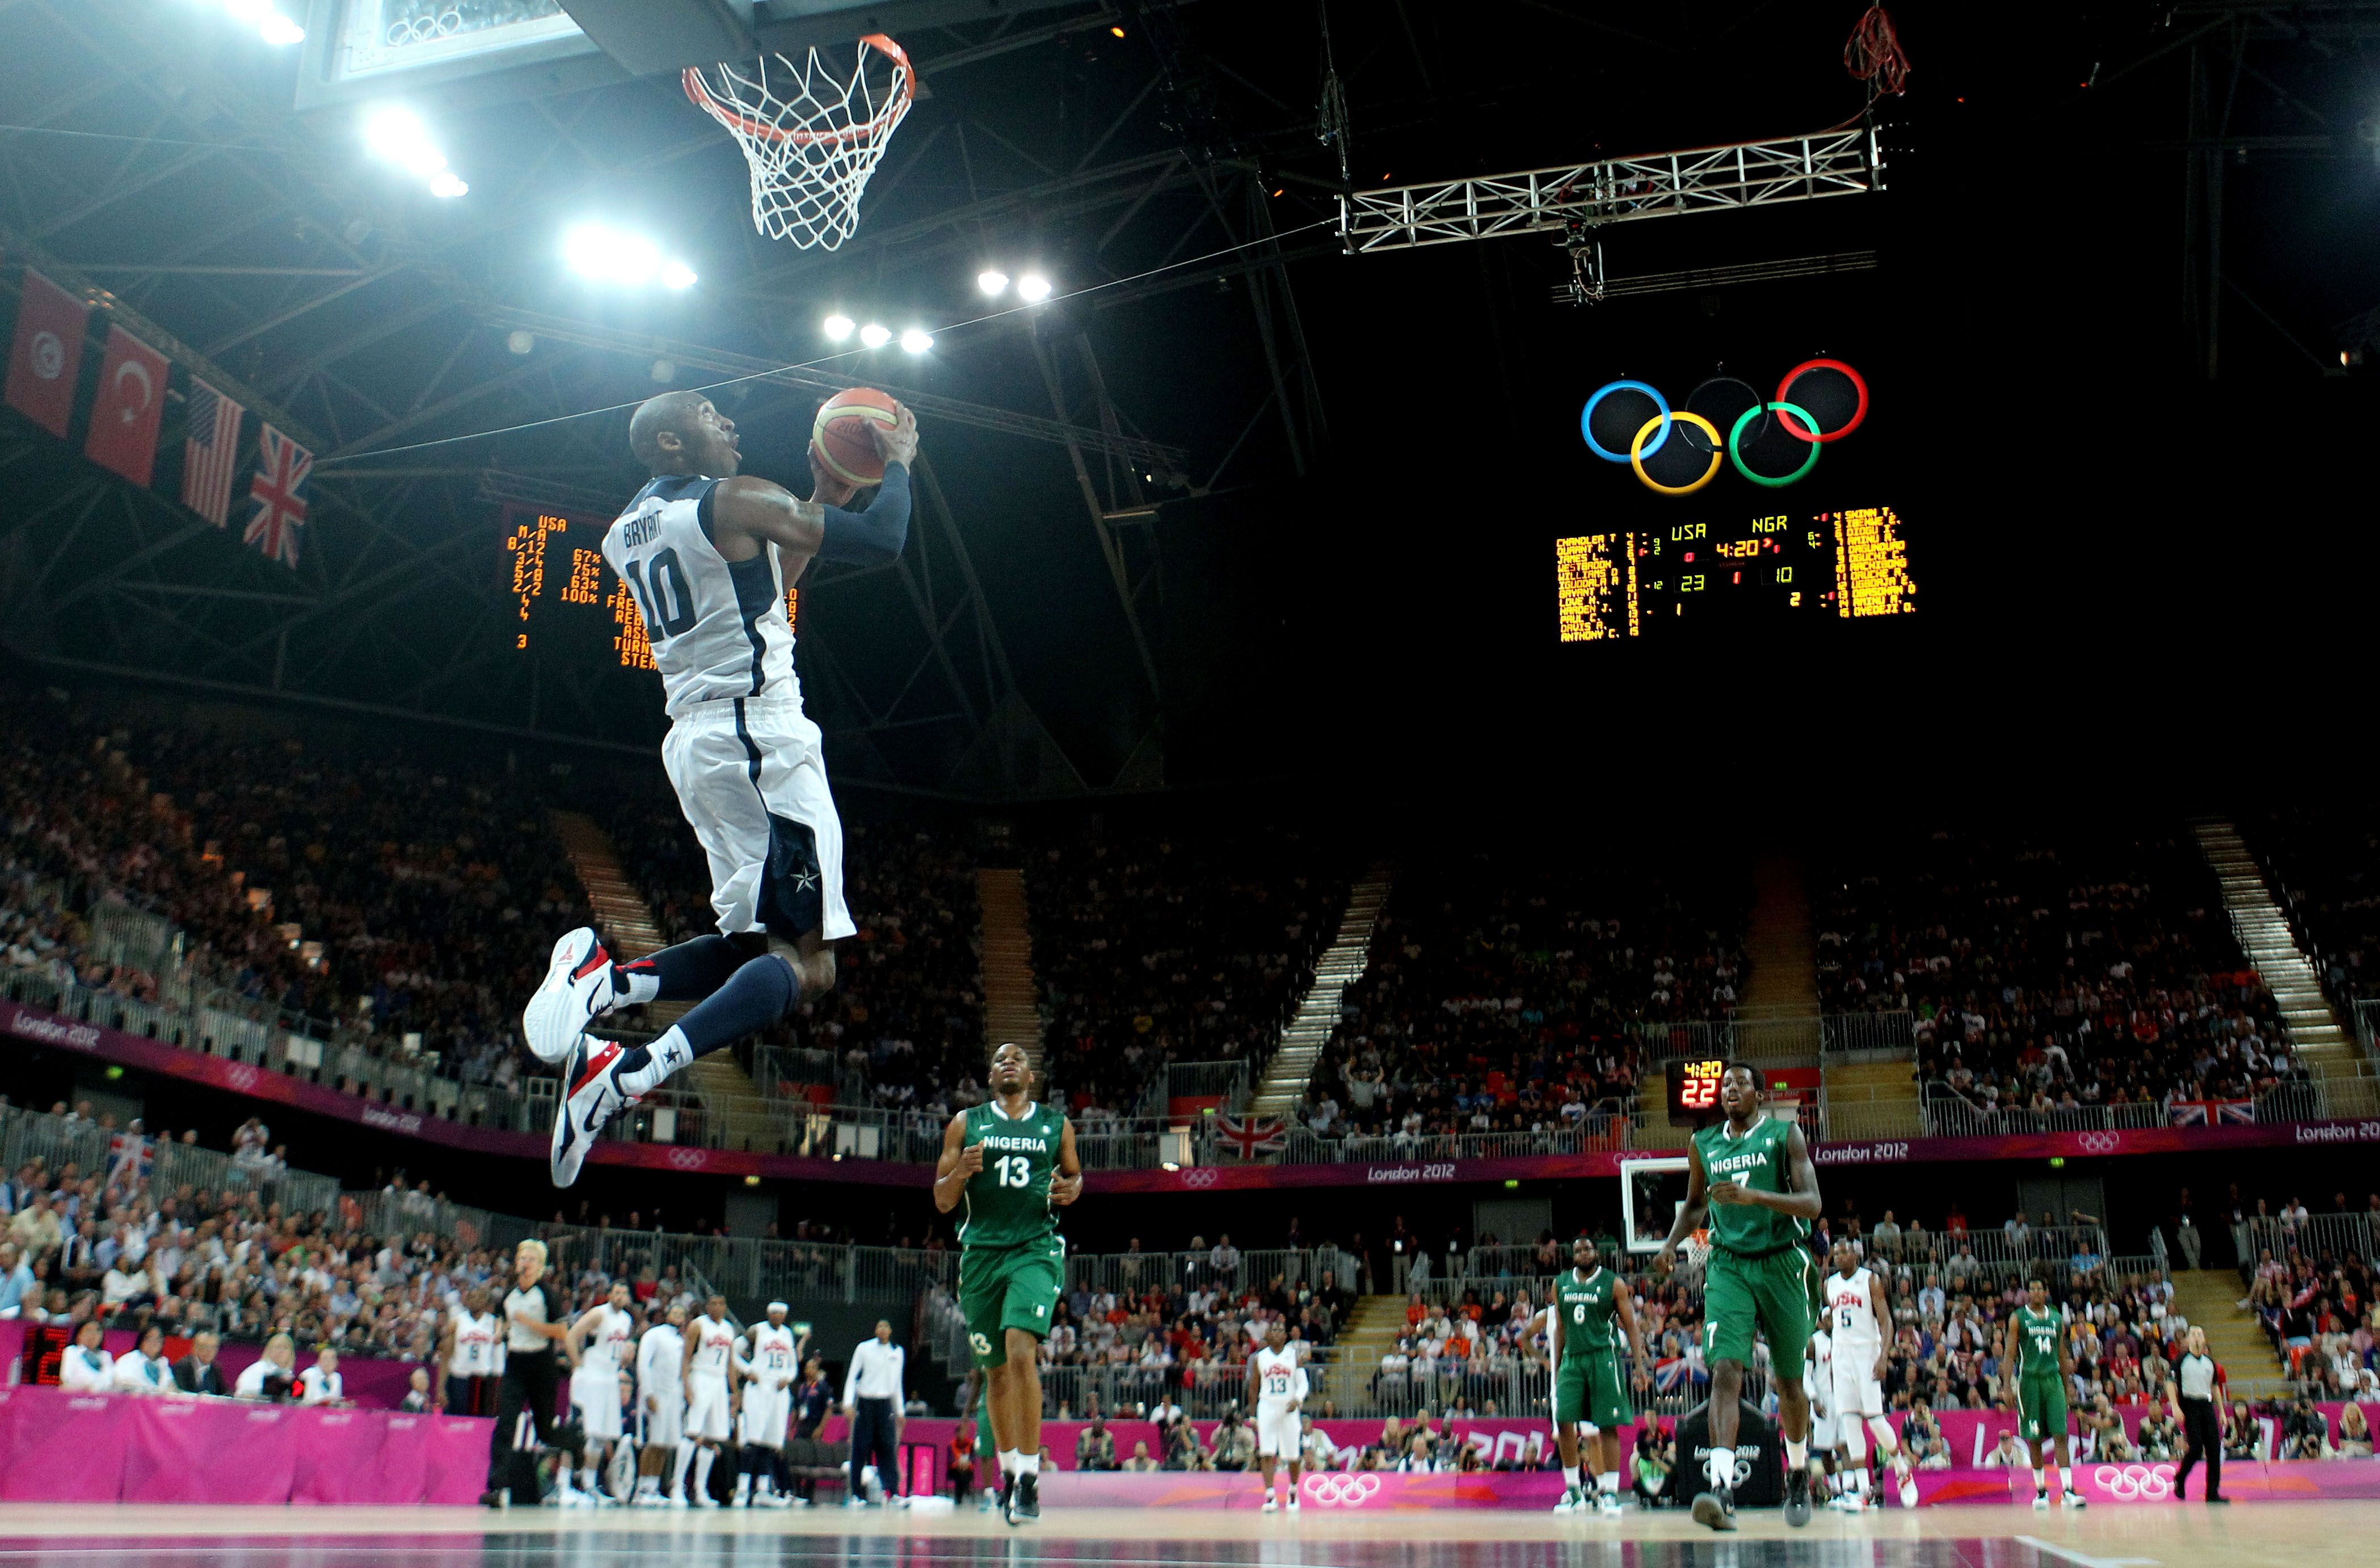 Kobe Bryant #10 of United States slam dunks against Nigeria in the first half during the Men's Basketball Preliminary Round match on Day 6 of the London 2012 Olympic Games